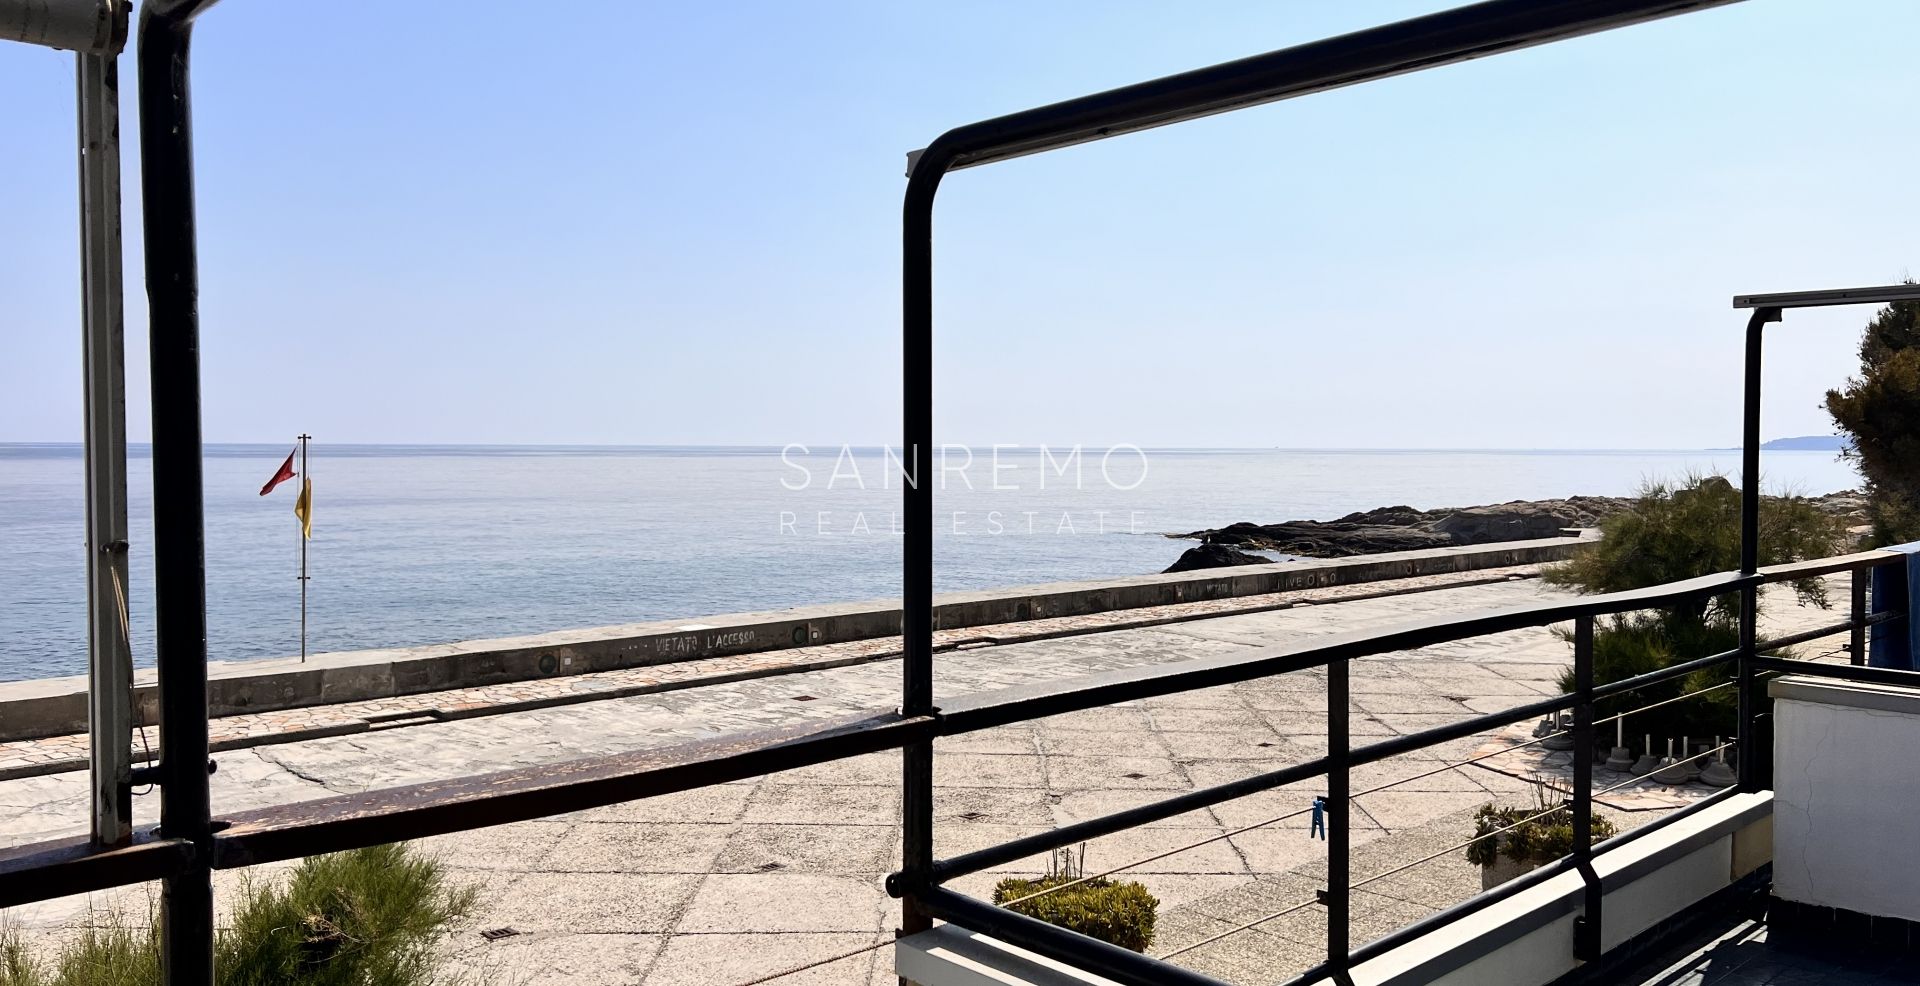 Studio Flat in Capo Nero with 3 swimming pools and bar service